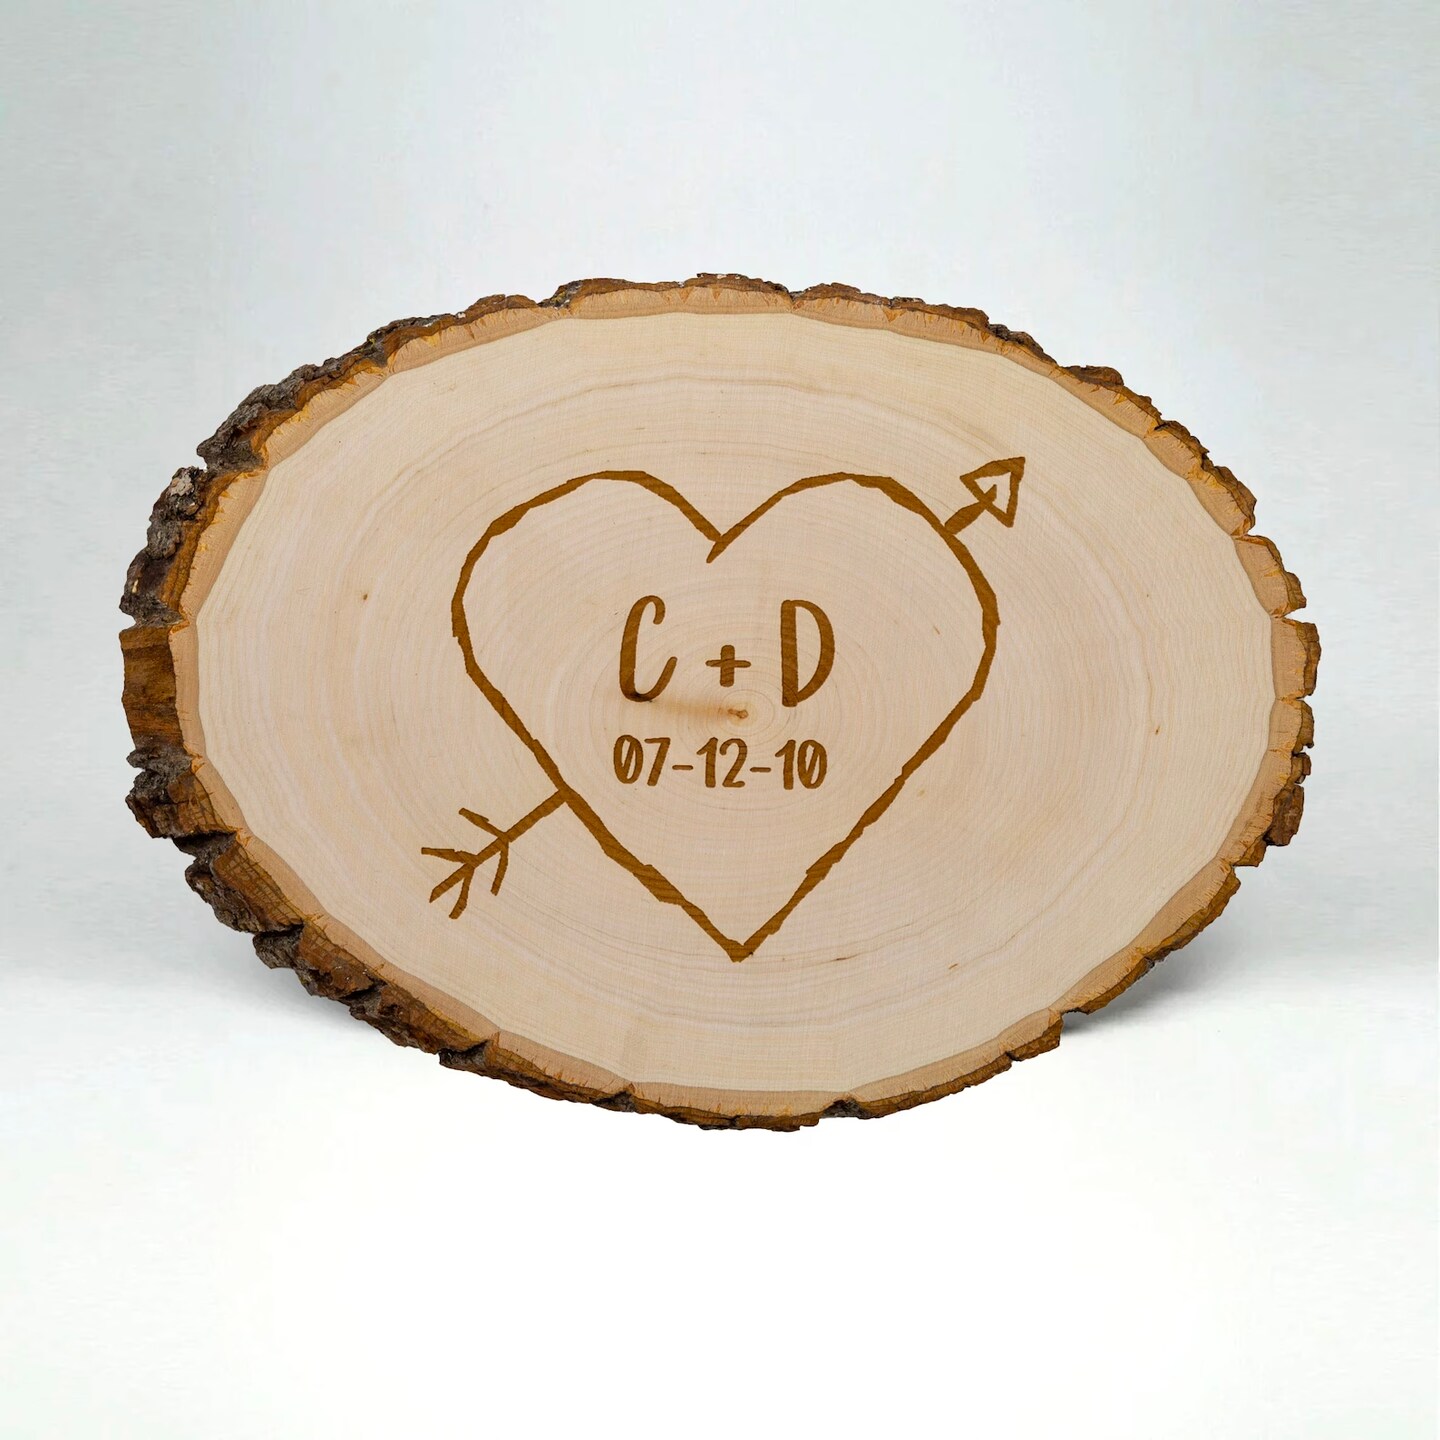 Traditional Wood Gift for 5th Anniversary-5 years of Marriage- Engraved Wood  | eBay